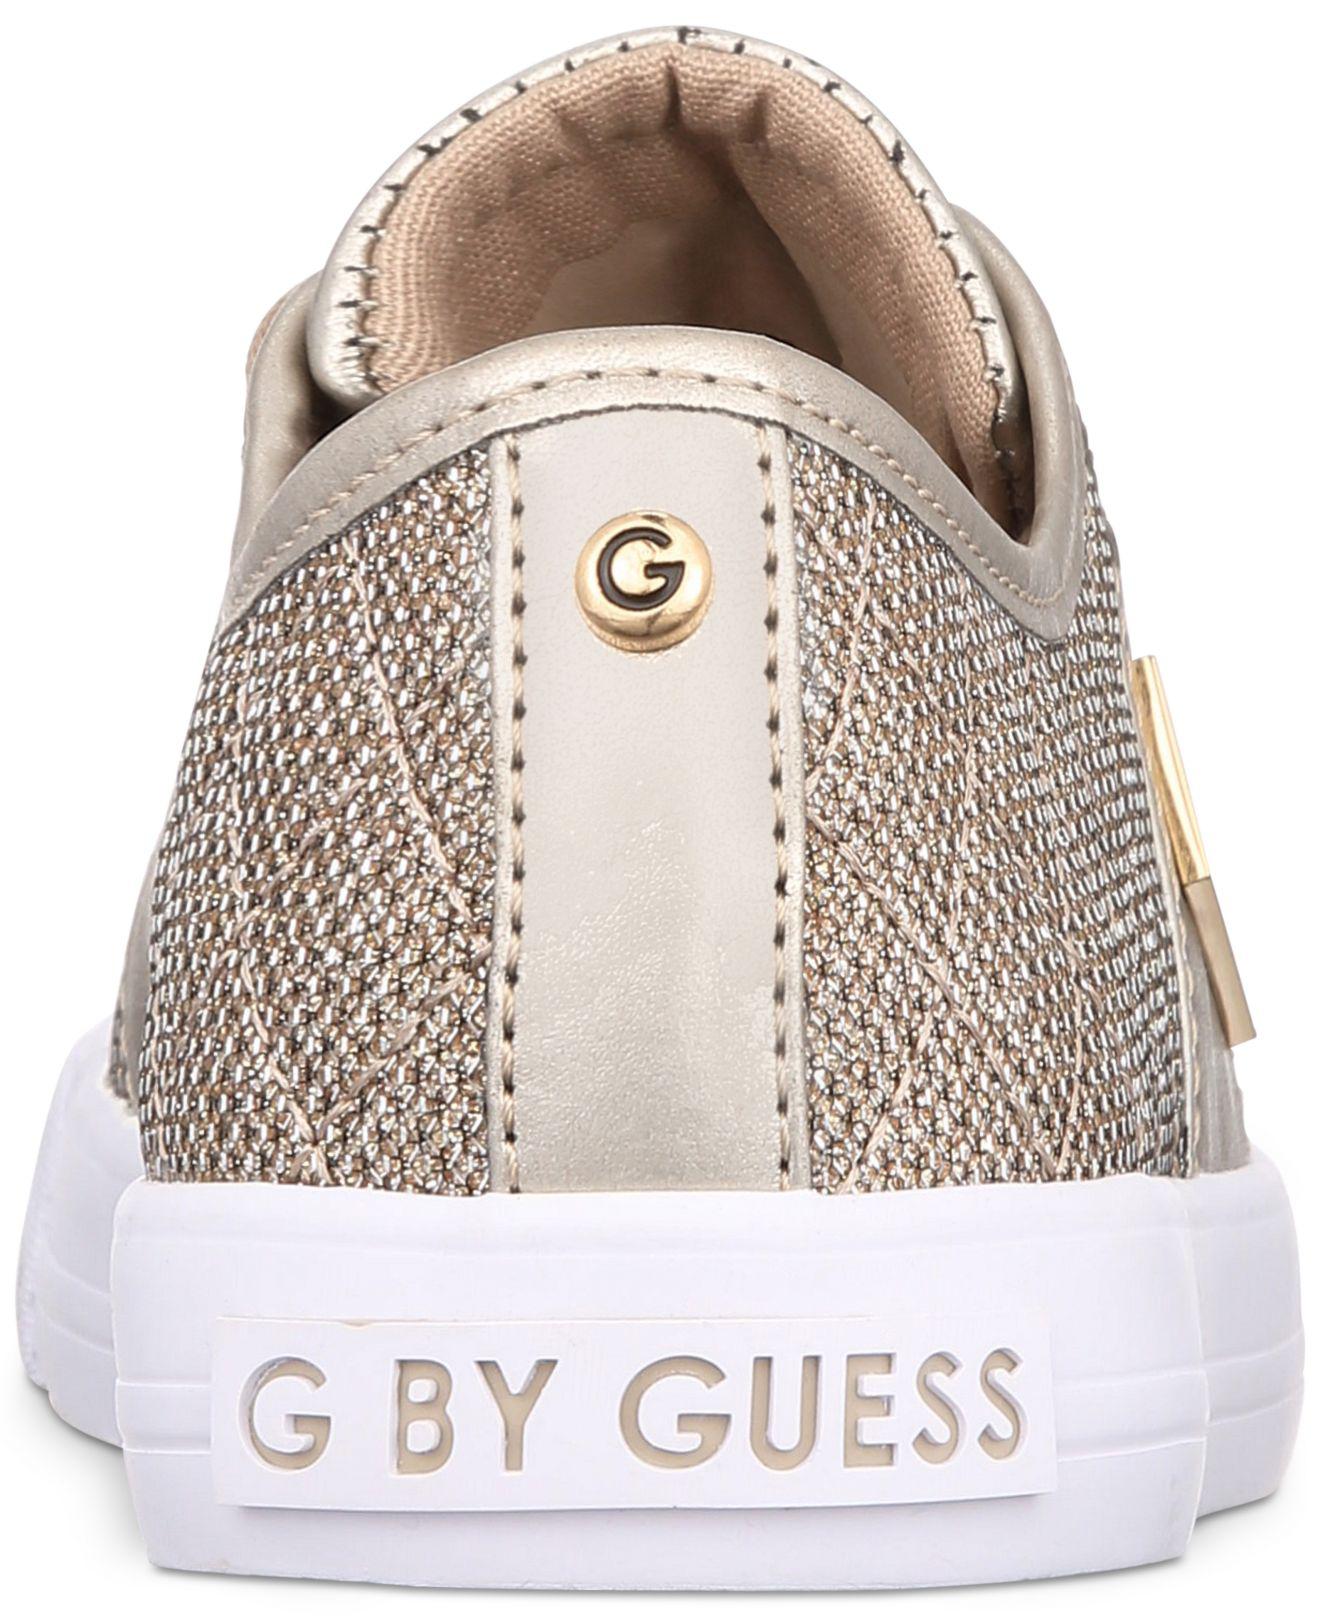 g by guess backer